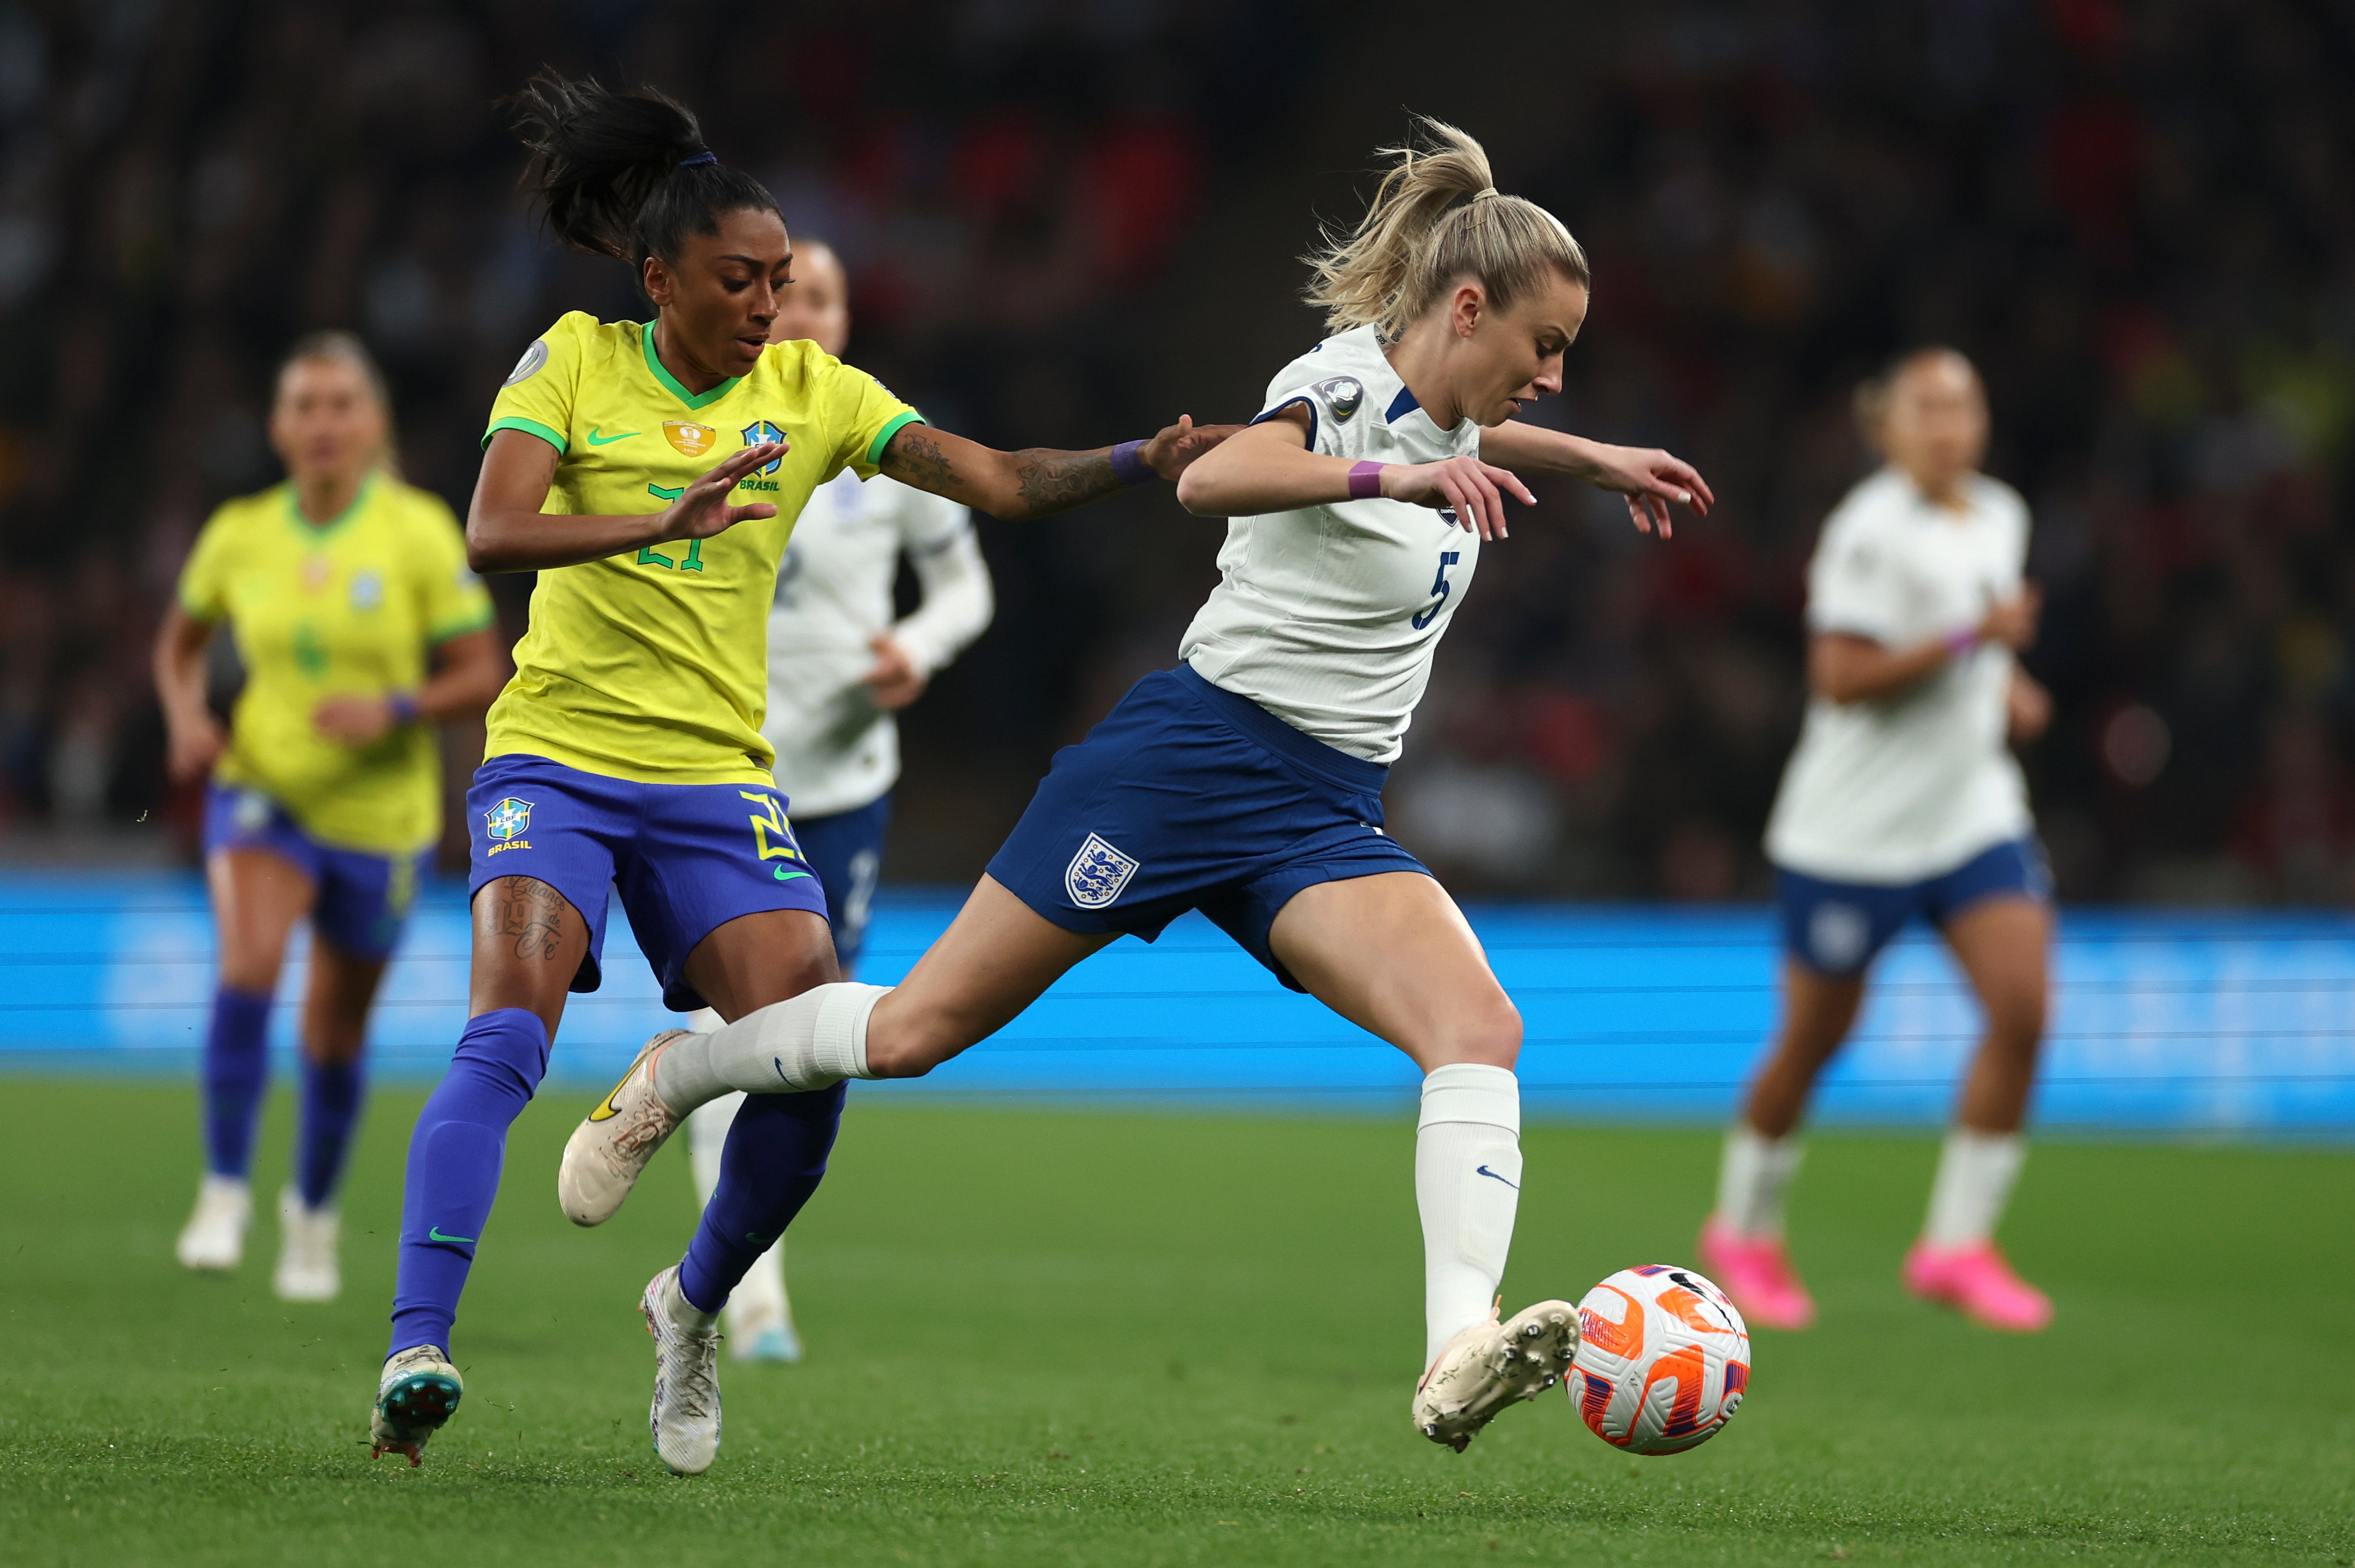 Williamson is a key part of the Lionesses set-up